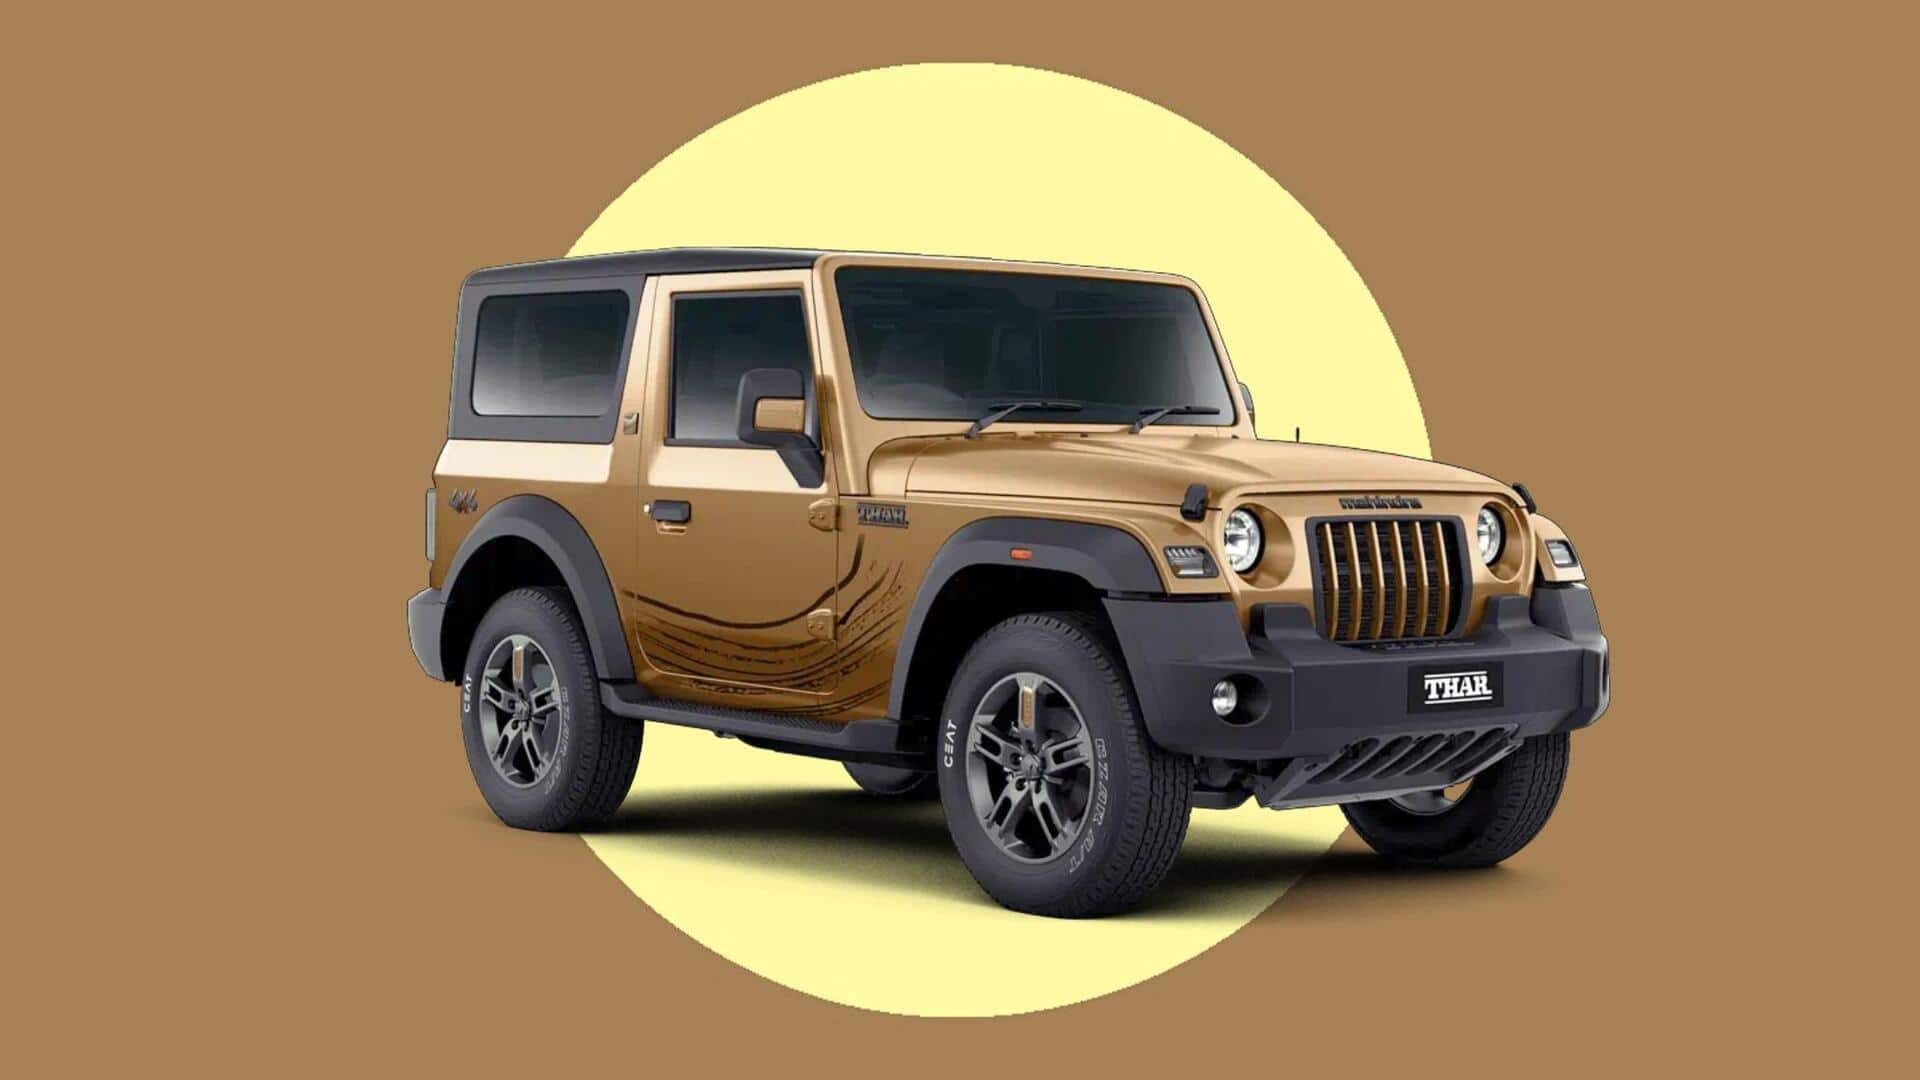 Mahindra Thar's 5-door model spotted again: Check design features